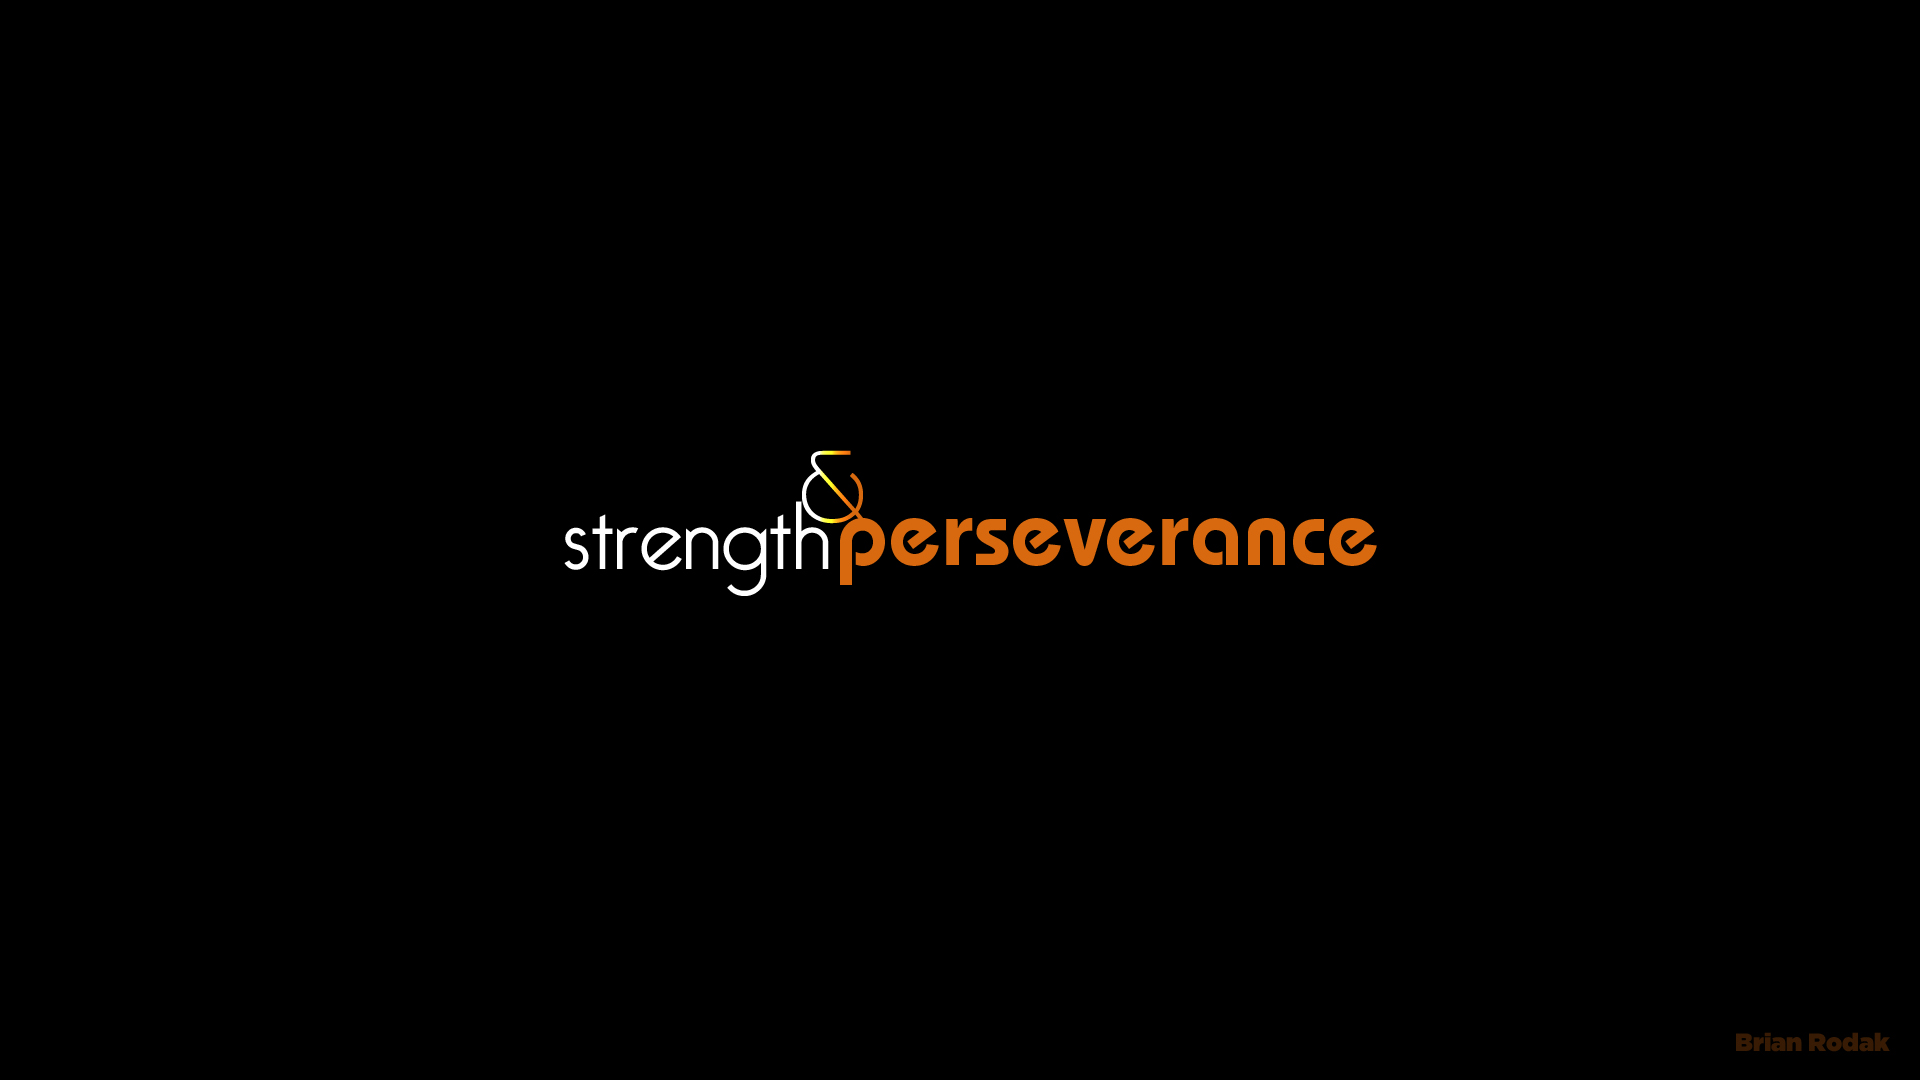 Strength And Perseverance by brianrodak on DeviantArt